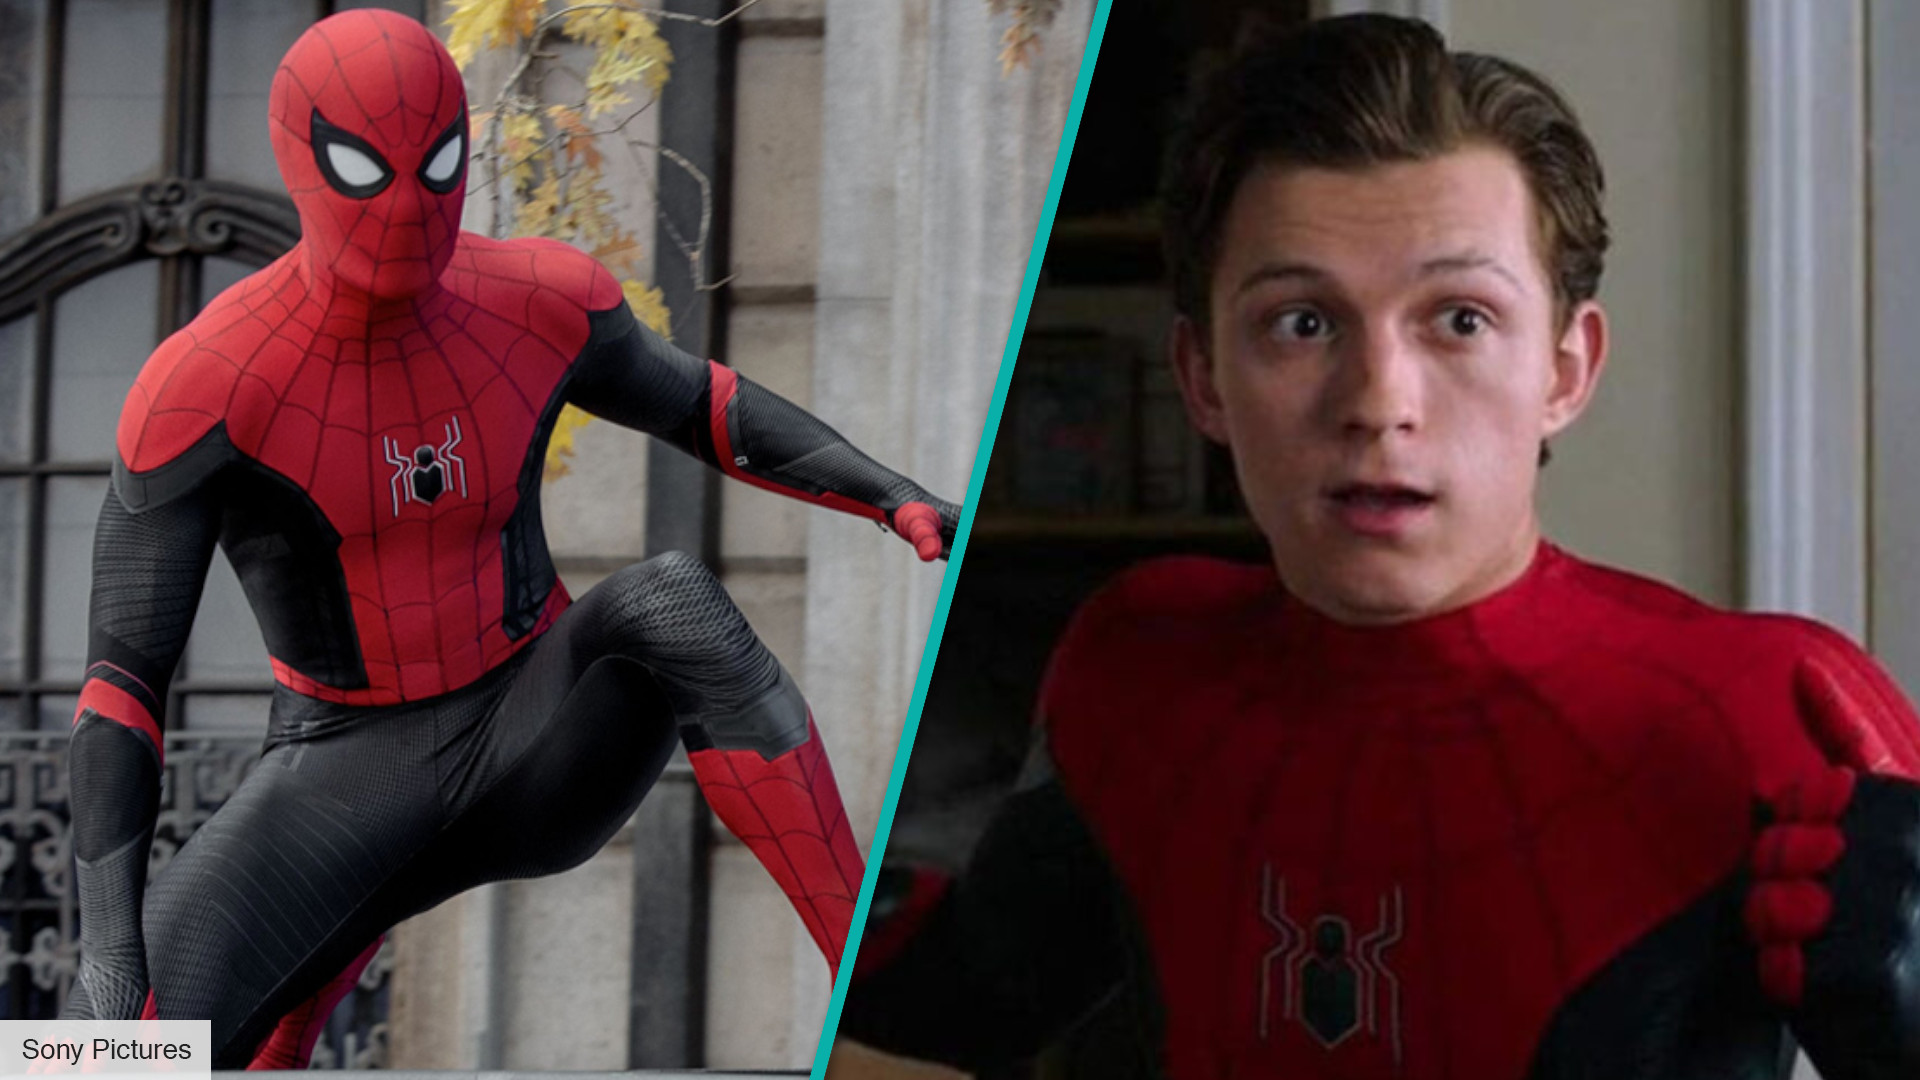 Spider-Man producer says Tom Holland embodies everything about Peter Parker  | The Digital Fix